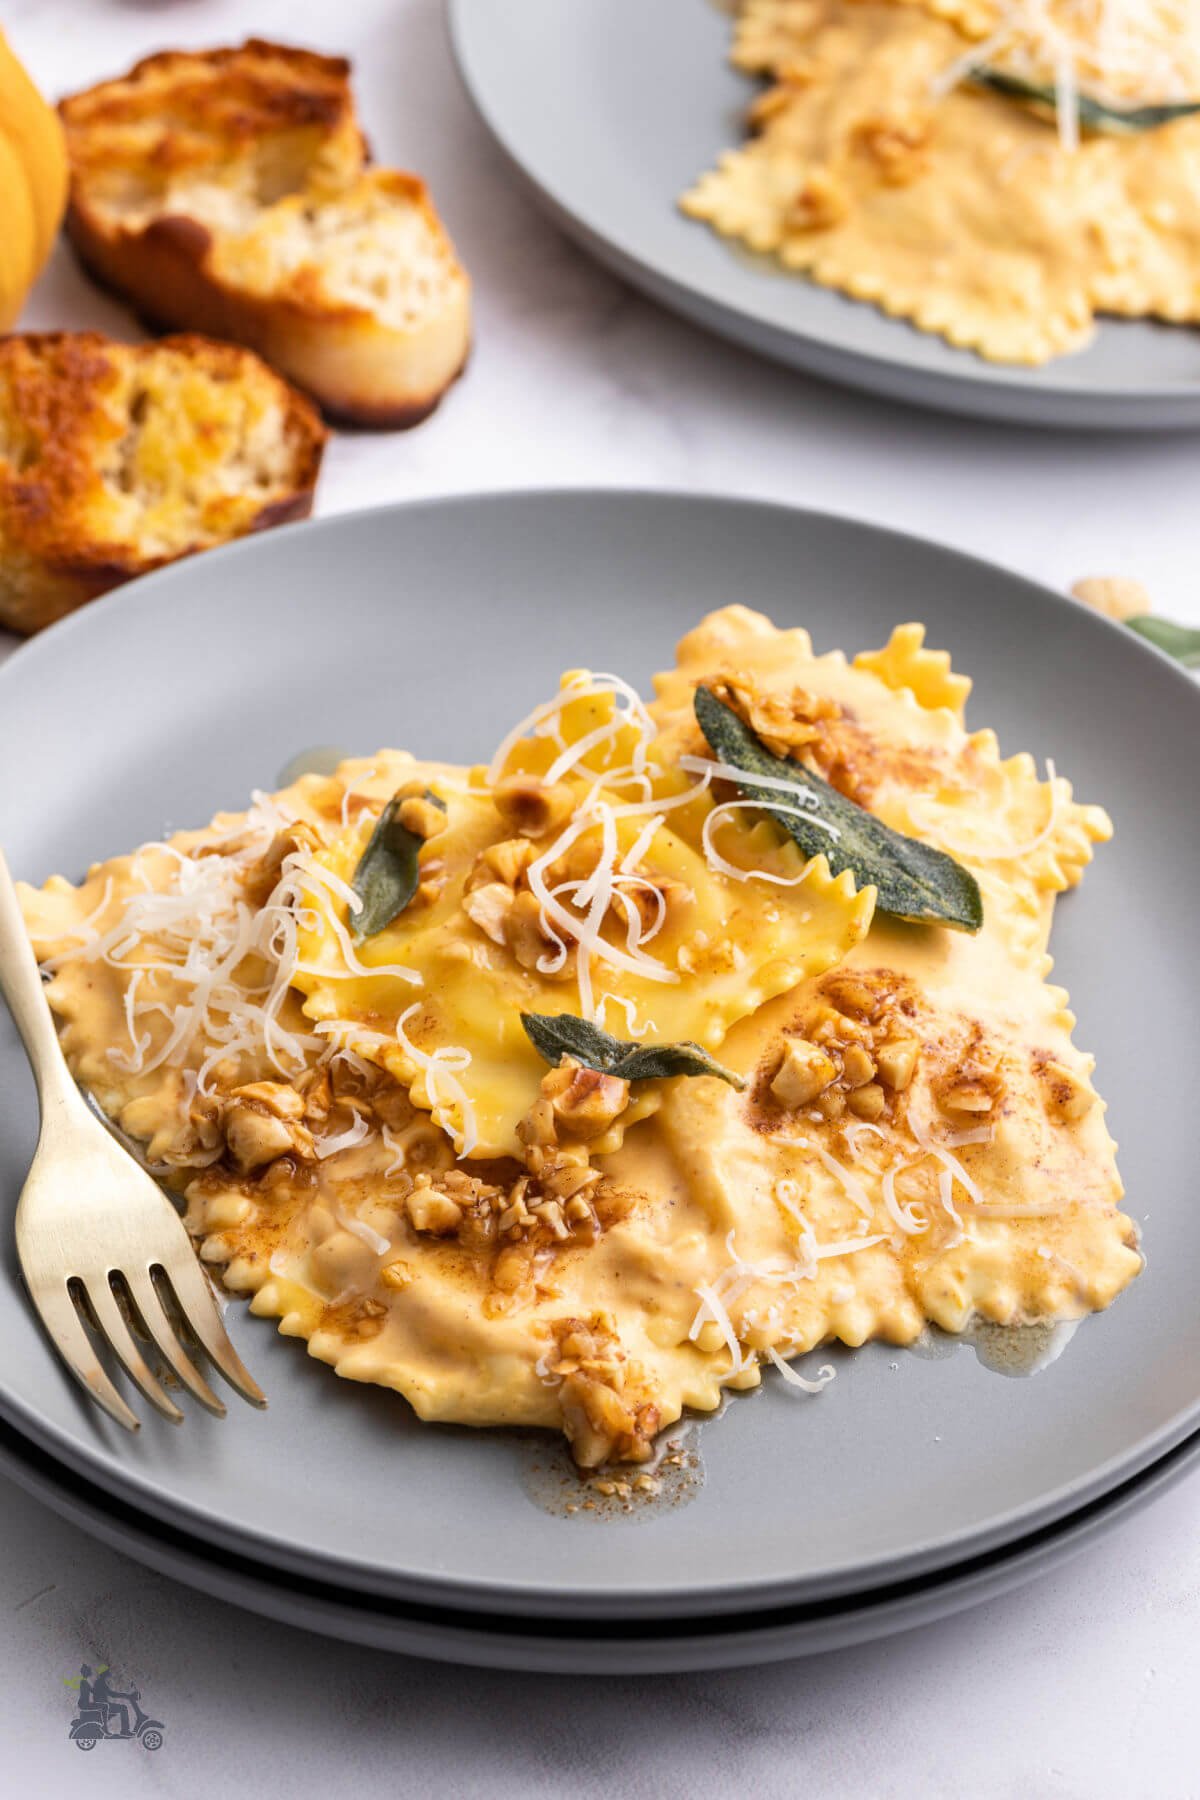 A serving of Cheese Ravioli pasta with pumpkin cream sauce topped with chopped hazelnuts and fried sage leaves. 